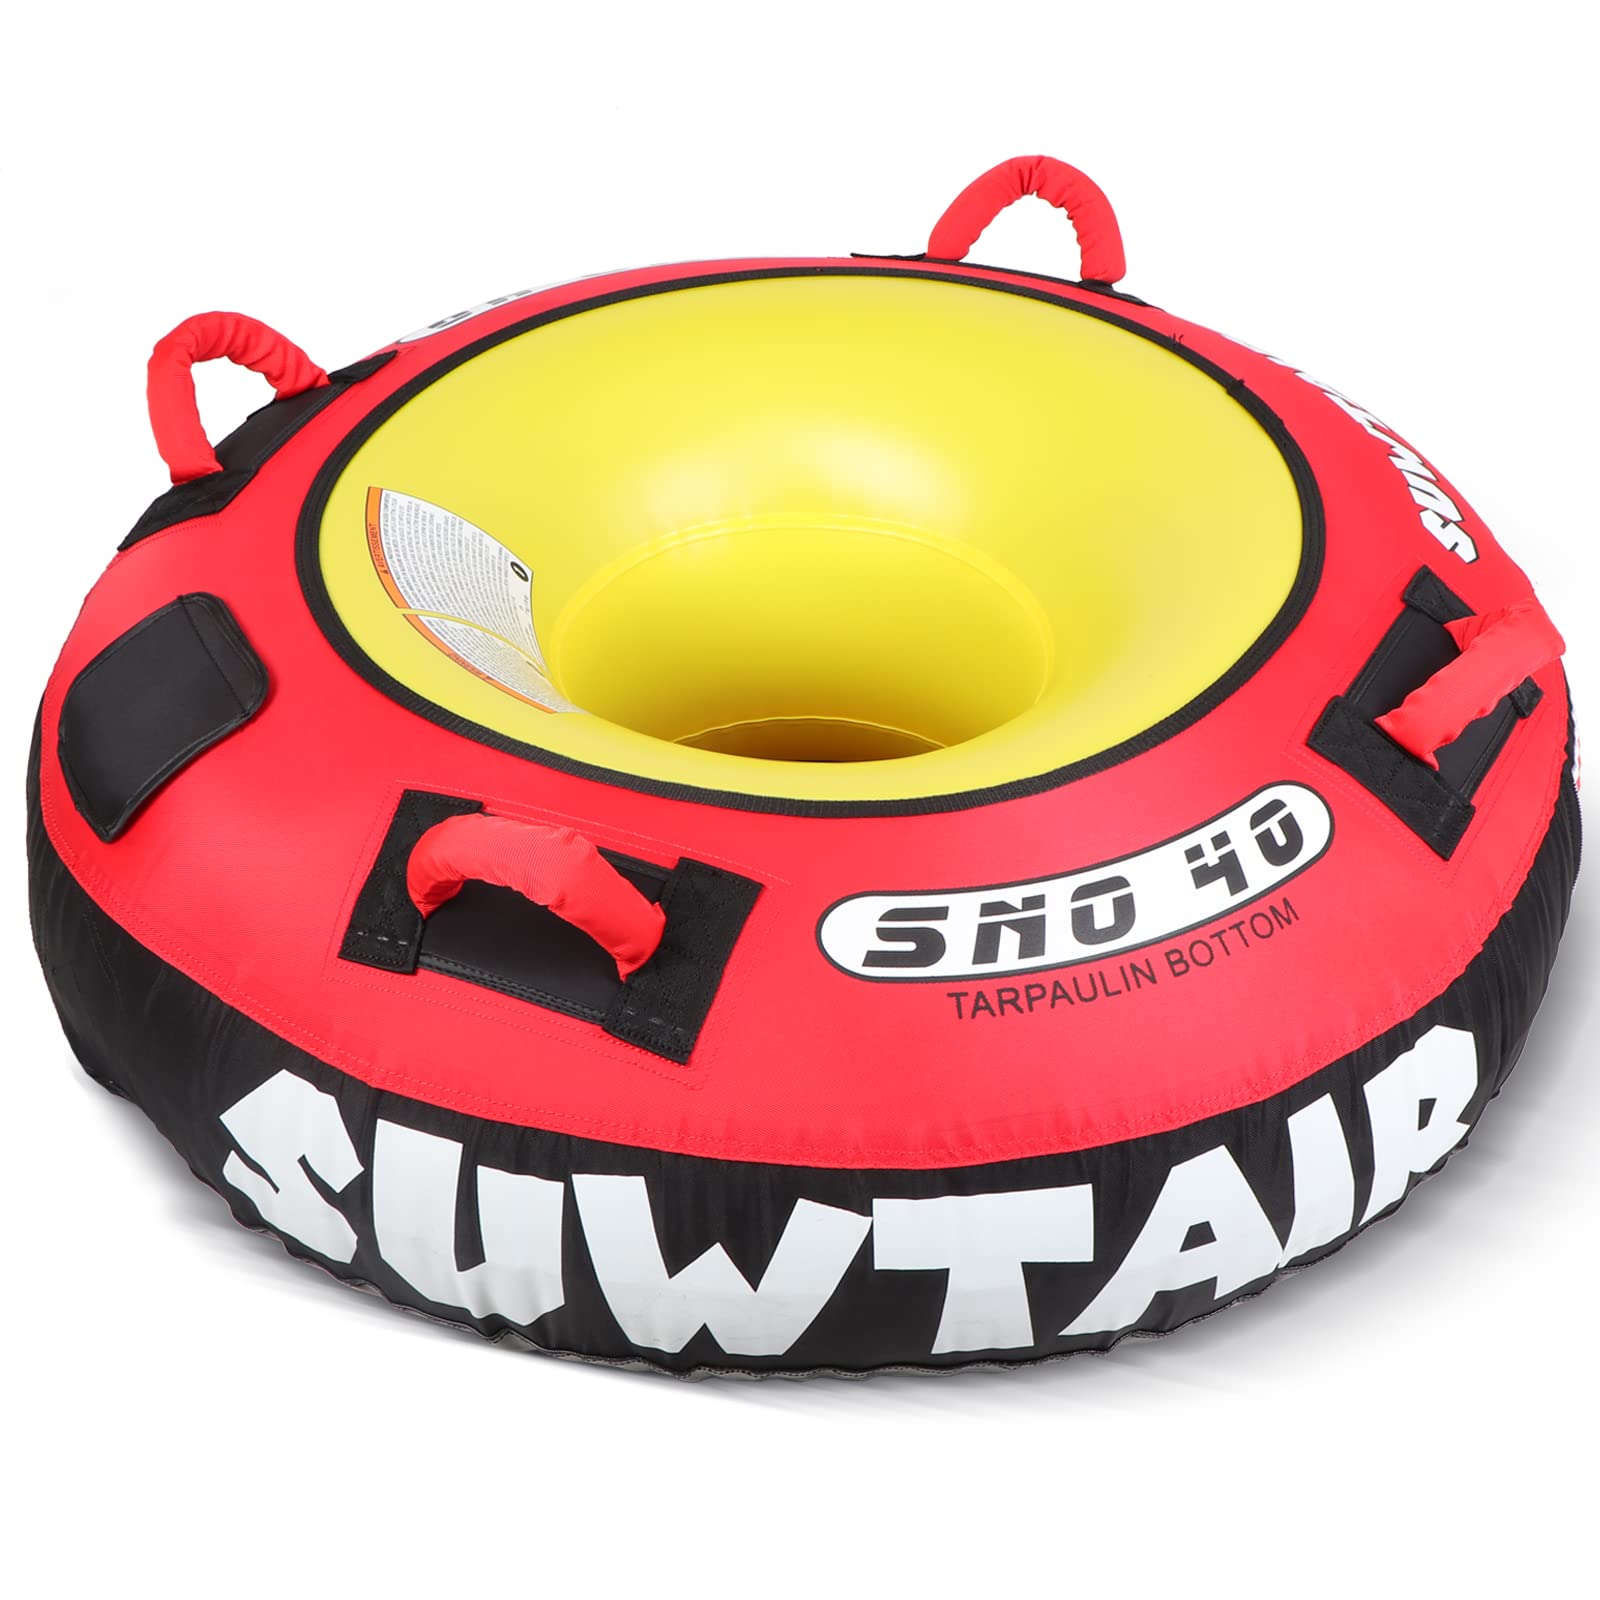 SUWTAIR River Tubes for Floating Heavy Duty with Premium Nylon Cover -  Commercial Grade Rafting Tubes,Lake